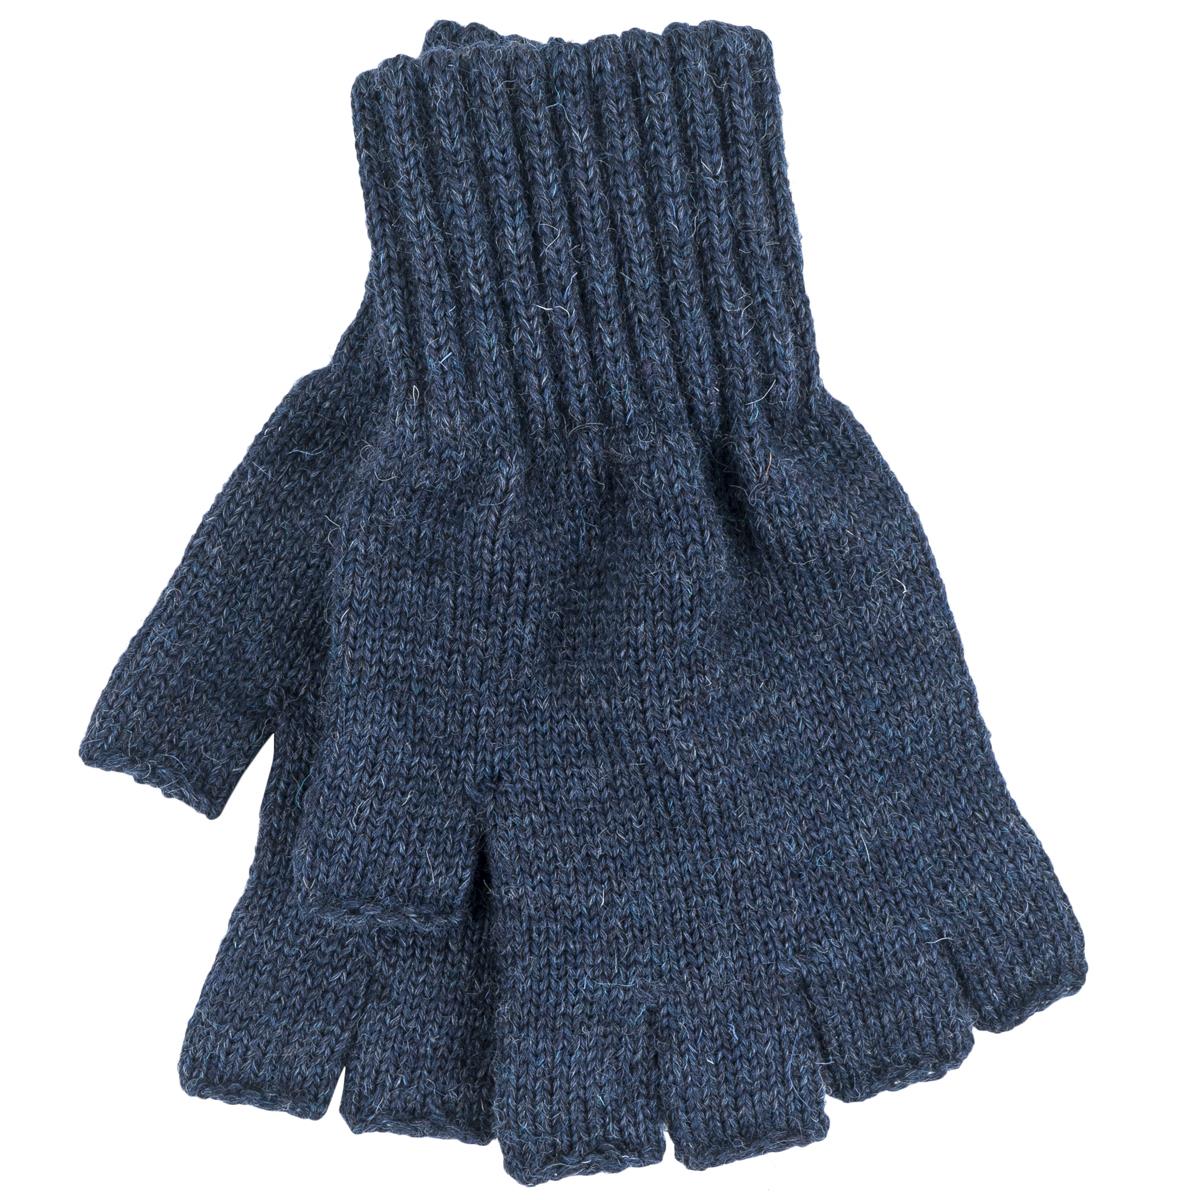 In what situations are Barbour fingerless gloves suitable?